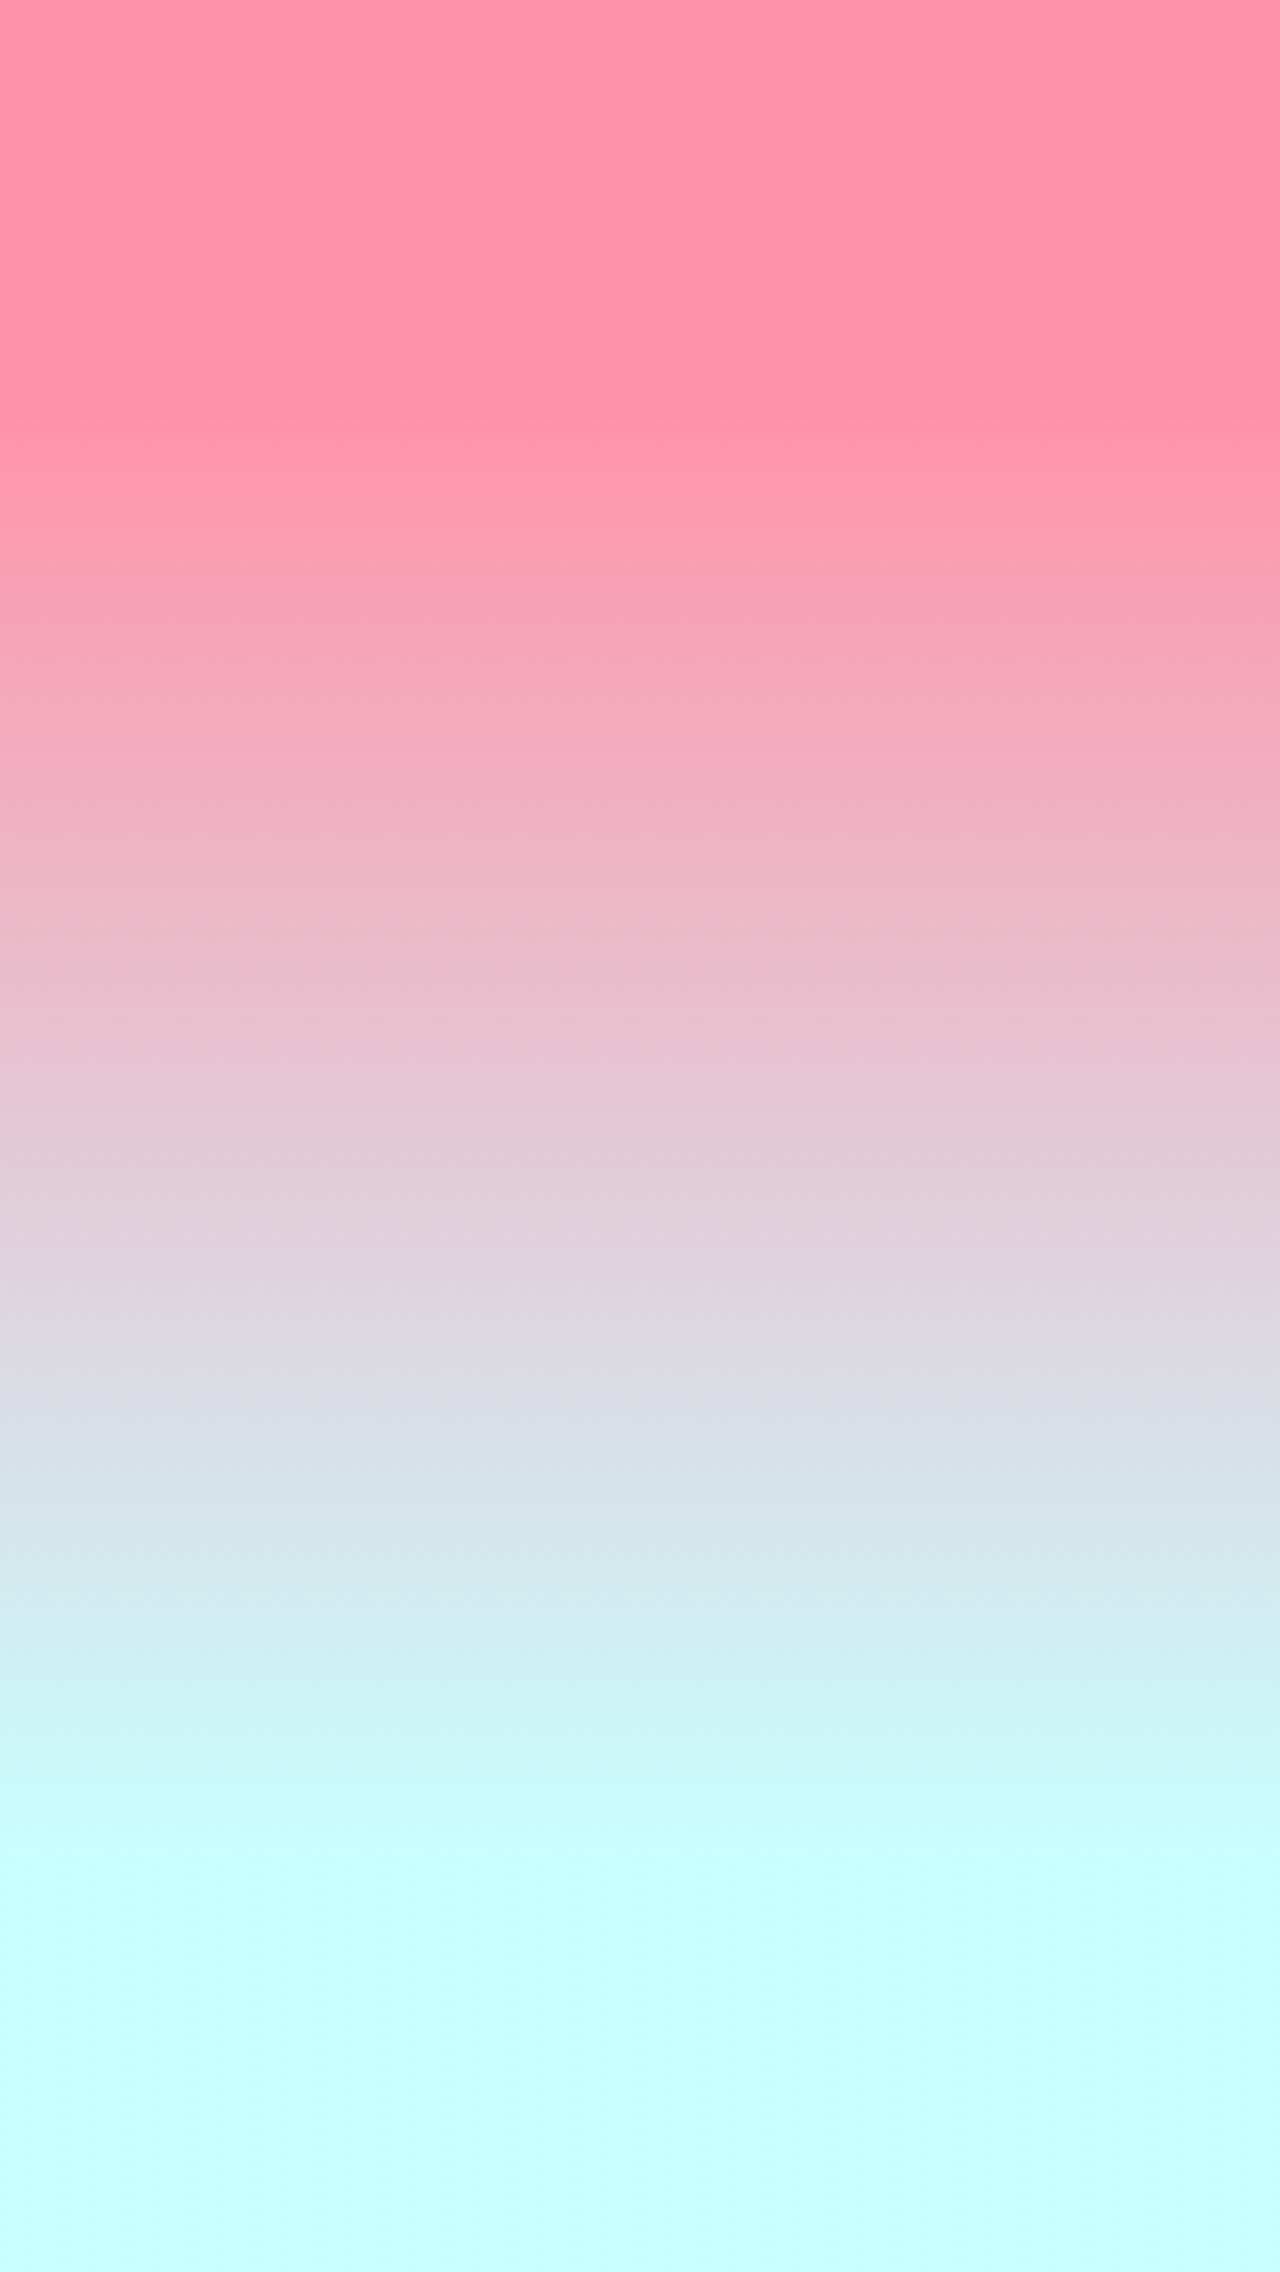 1280x2272 Pink and blue ombre iphone wallpaper